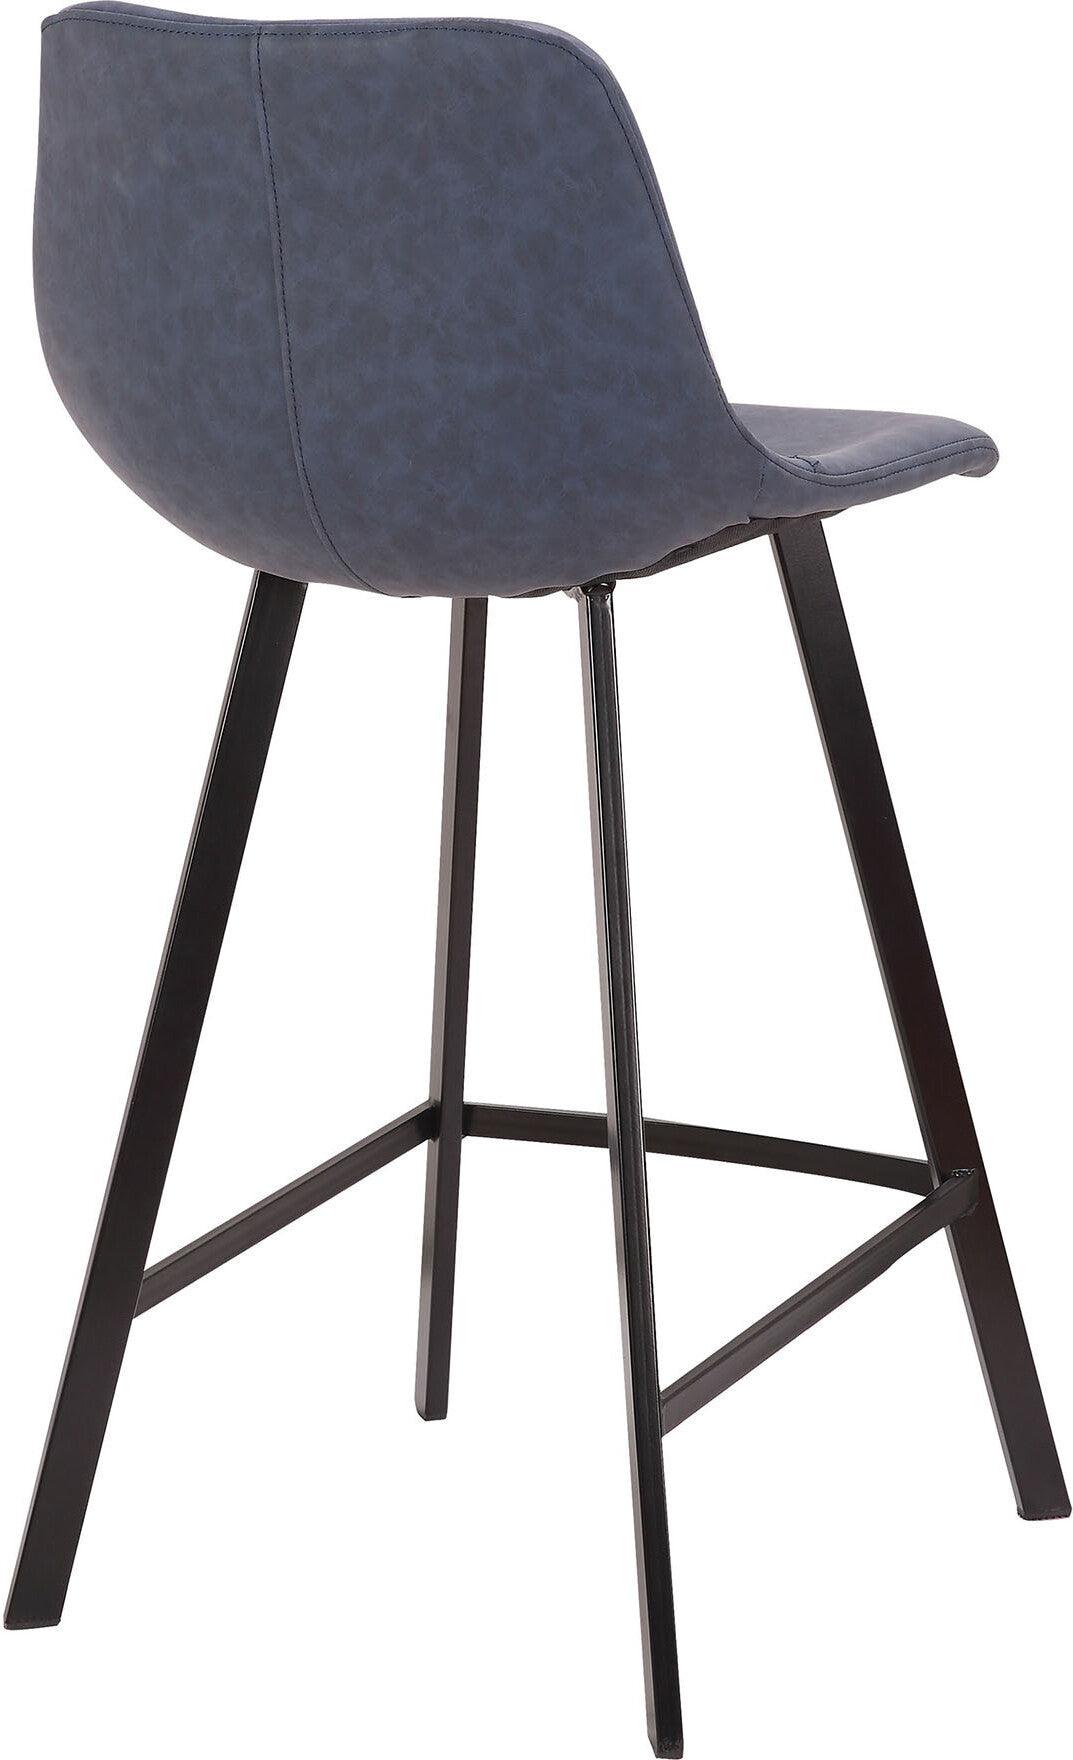 Lumisource Barstools - Outlaw Counter Stool Blue & Black Legs (Set of 2)